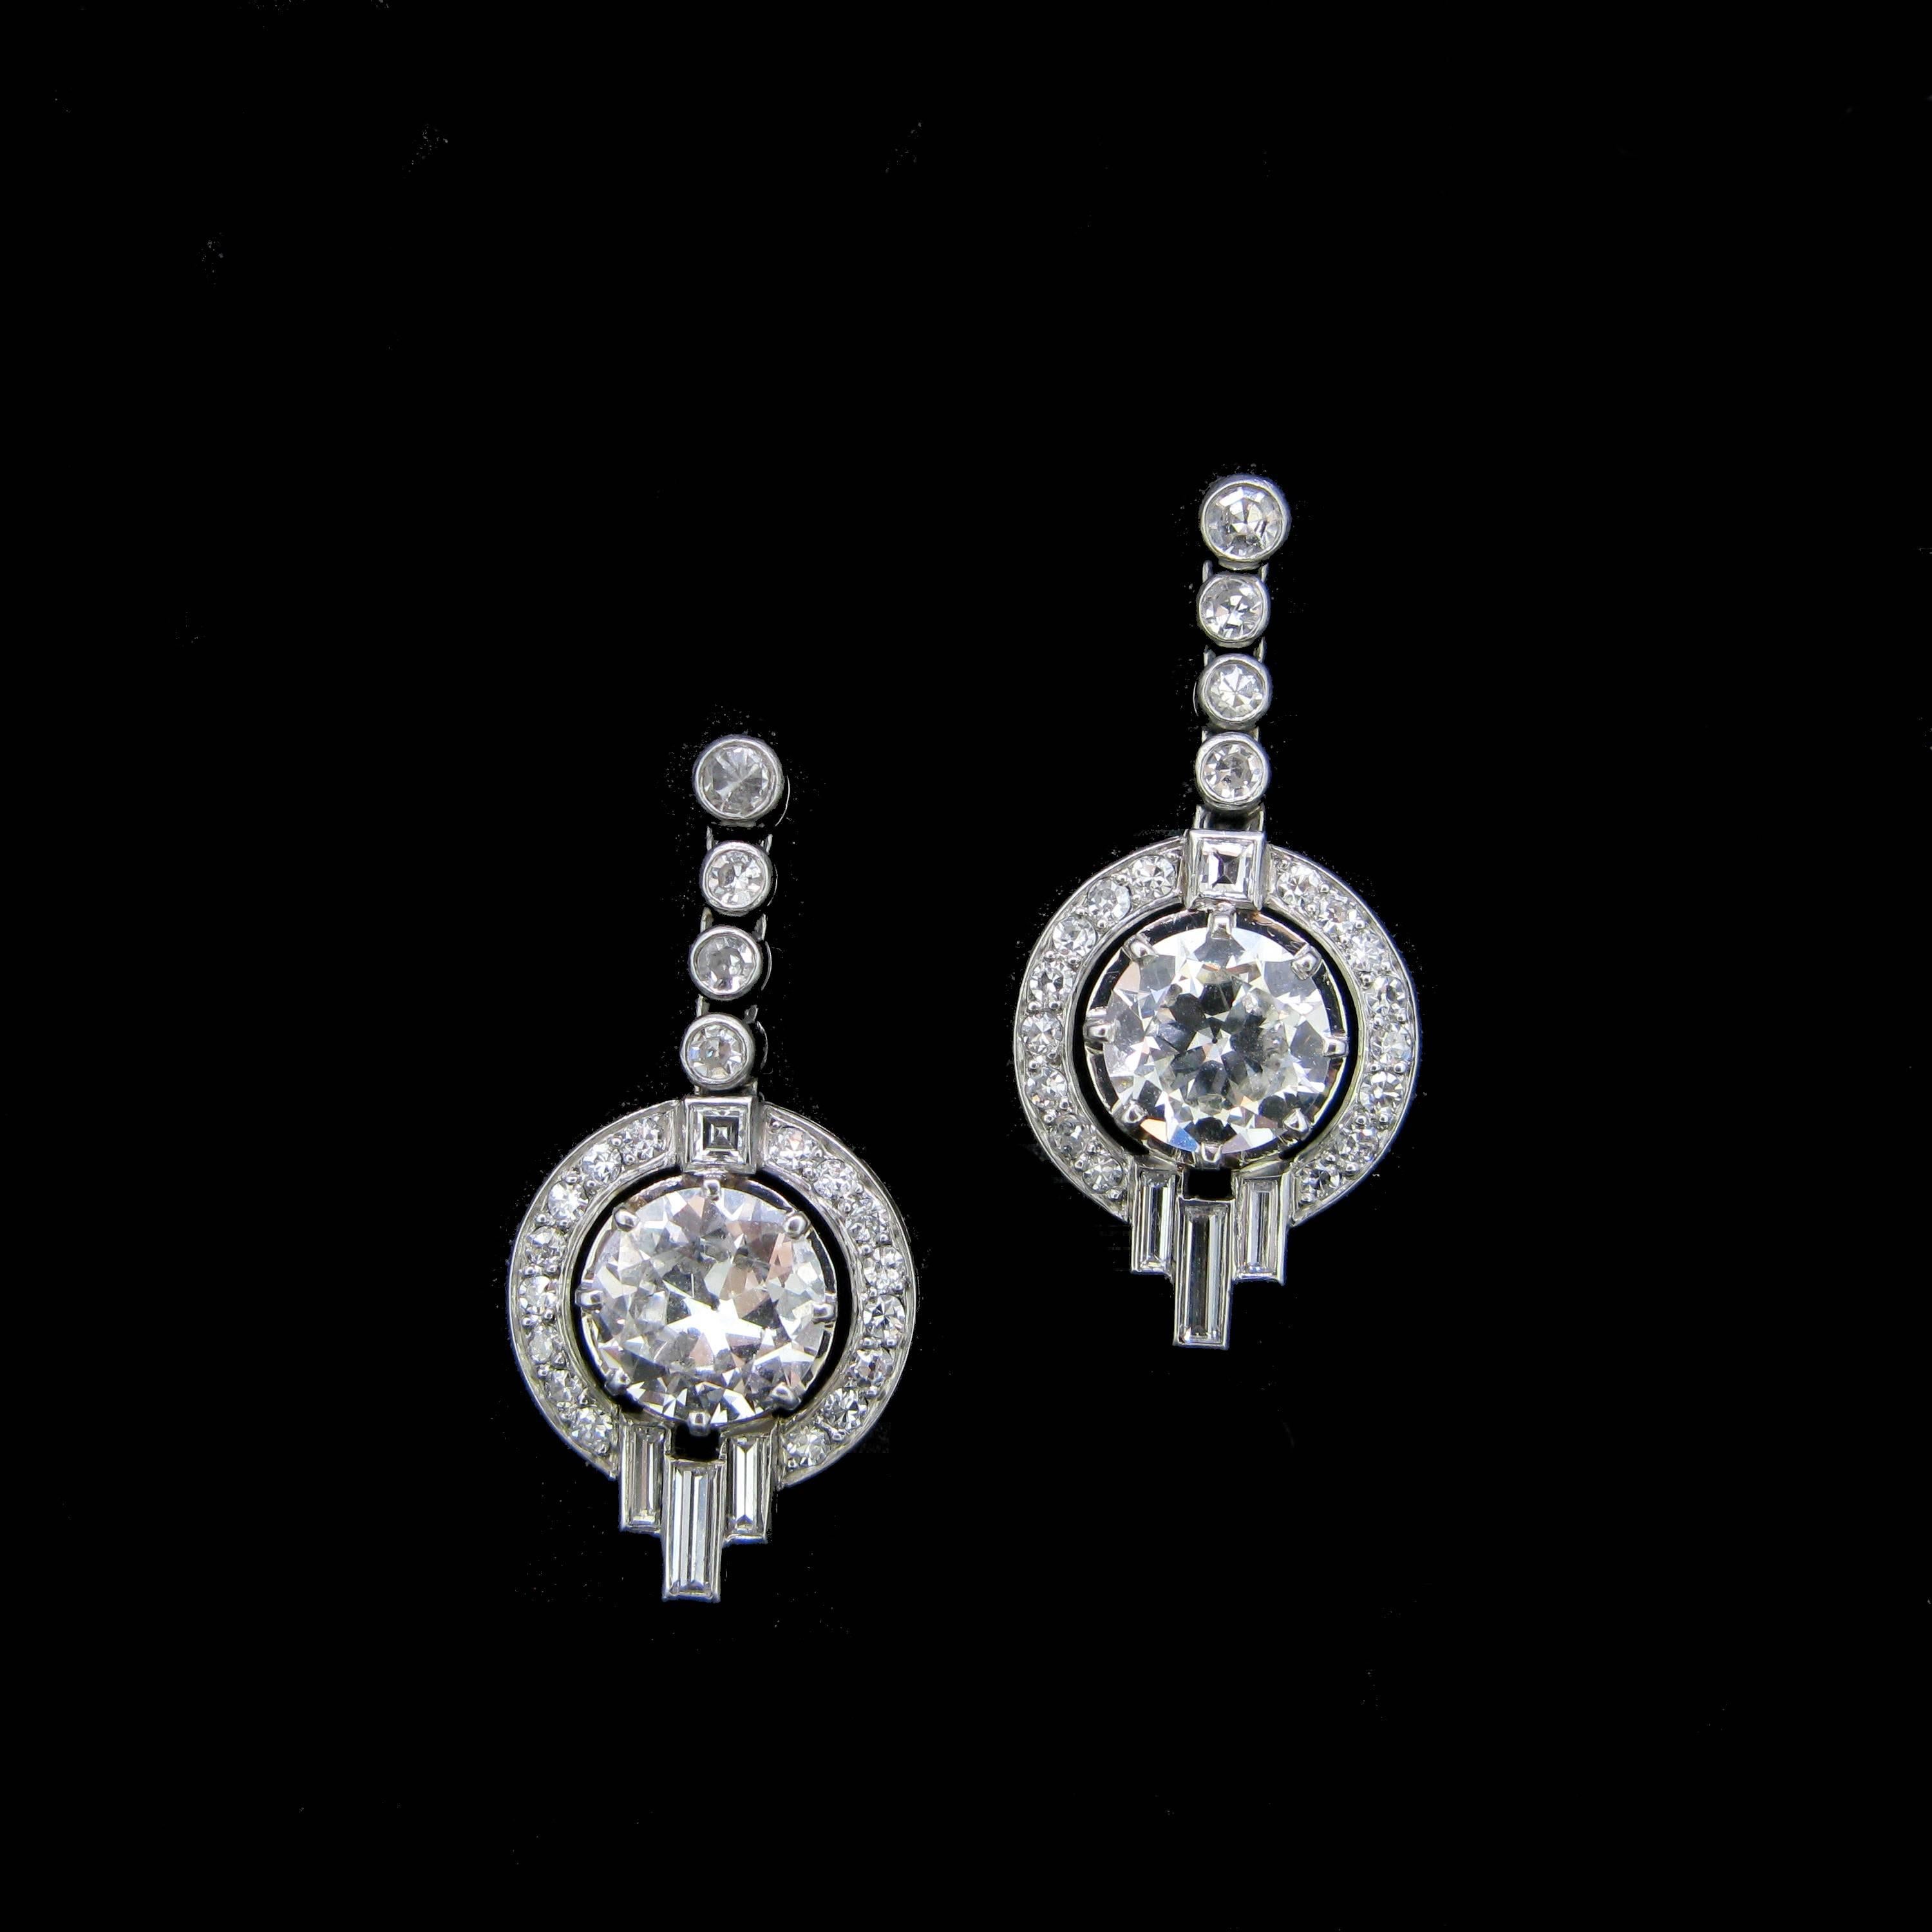 This beautiful pair of dangling earring si from the Art Deco era with its geometric shape. They are made in both 18kt white gold and platinum and are set with two main round brilliant cut diamonds each weighing 1.40ct and then surrounded by smaller